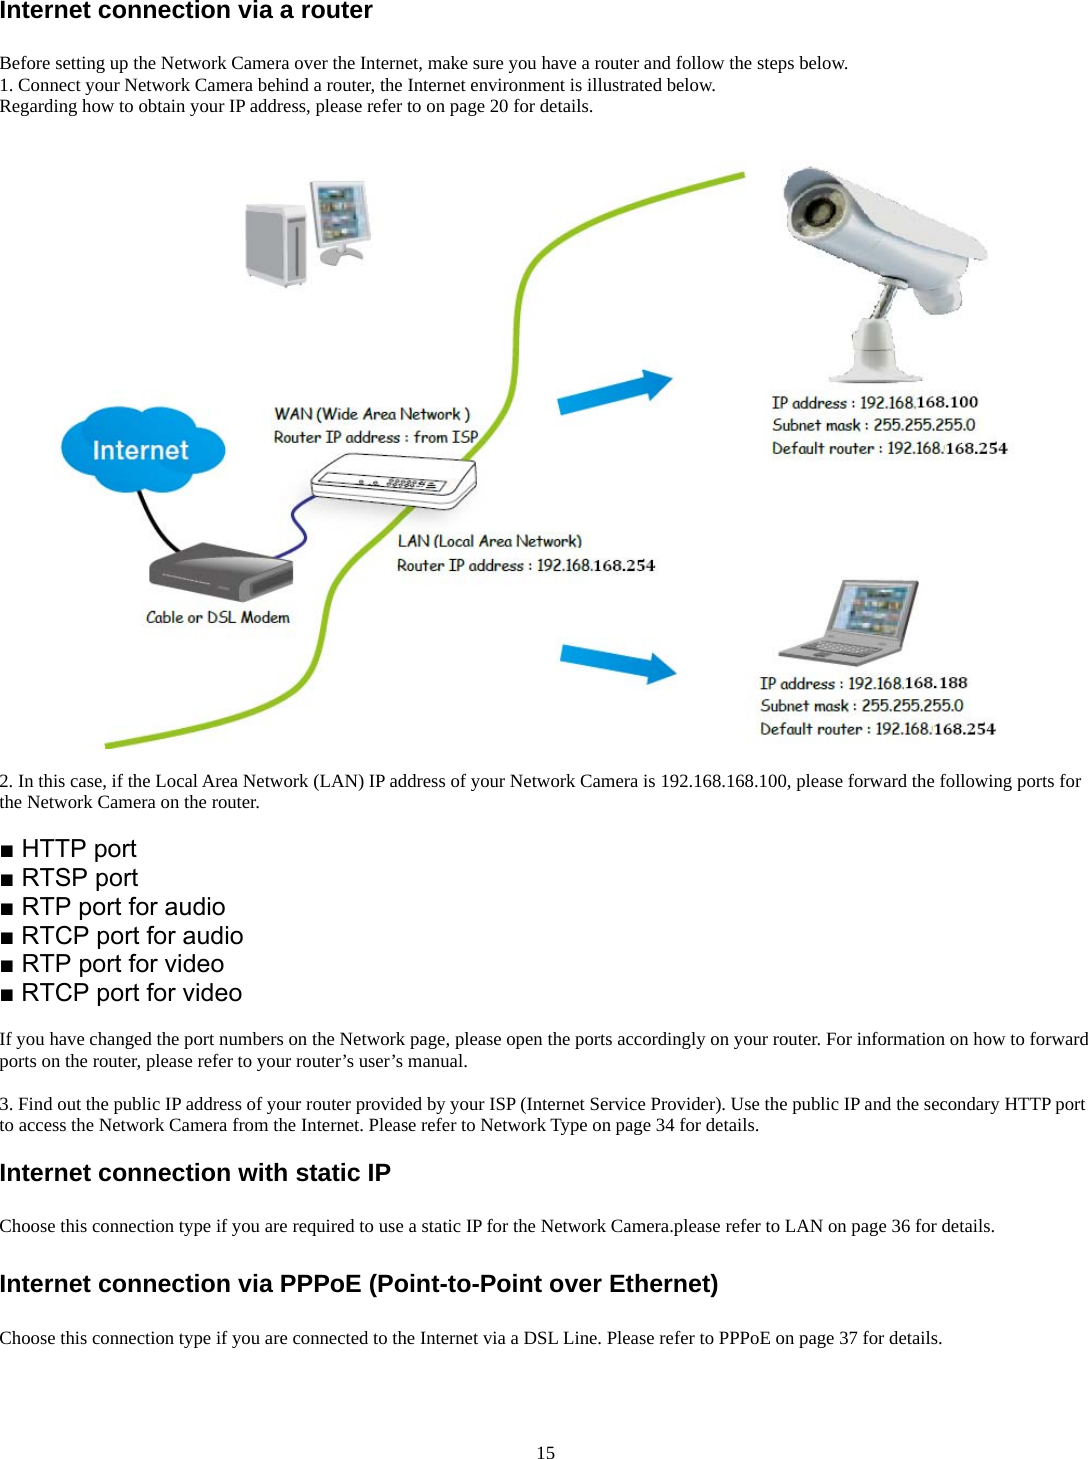 Internet connection via a router  Before setting up the Network Camera over the Internet, make sure you have a router and follow the steps below. 1. Connect your Network Camera behind a router, the Internet environment is illustrated below. Regarding how to obtain your IP address, please refer to on page 20 for details.                 2. In this case, if the Local Area Network (LAN) IP address of your Network Camera is 192.168.168.100, please forward the following ports for the Network Camera on the router.  ■ HTTP port ■ RTSP port ■ RTP port for audio ■ RTCP port for audio ■ RTP port for video ■ RTCP port for video  If you have changed the port numbers on the Network page, please open the ports accordingly on your router. For information on how to forward ports on the router, please refer to your router’s user’s manual.  3. Find out the public IP address of your router provided by your ISP (Internet Service Provider). Use the public IP and the secondary HTTP port to access the Network Camera from the Internet. Please refer to Network Type on page 34 for details.  Internet connection with static IP  Choose this connection type if you are required to use a static IP for the Network Camera.please refer to LAN on page 36 for details.  Internet connection via PPPoE (Point-to-Point over Ethernet)  Choose this connection type if you are connected to the Internet via a DSL Line. Please refer to PPPoE on page 37 for details.     15